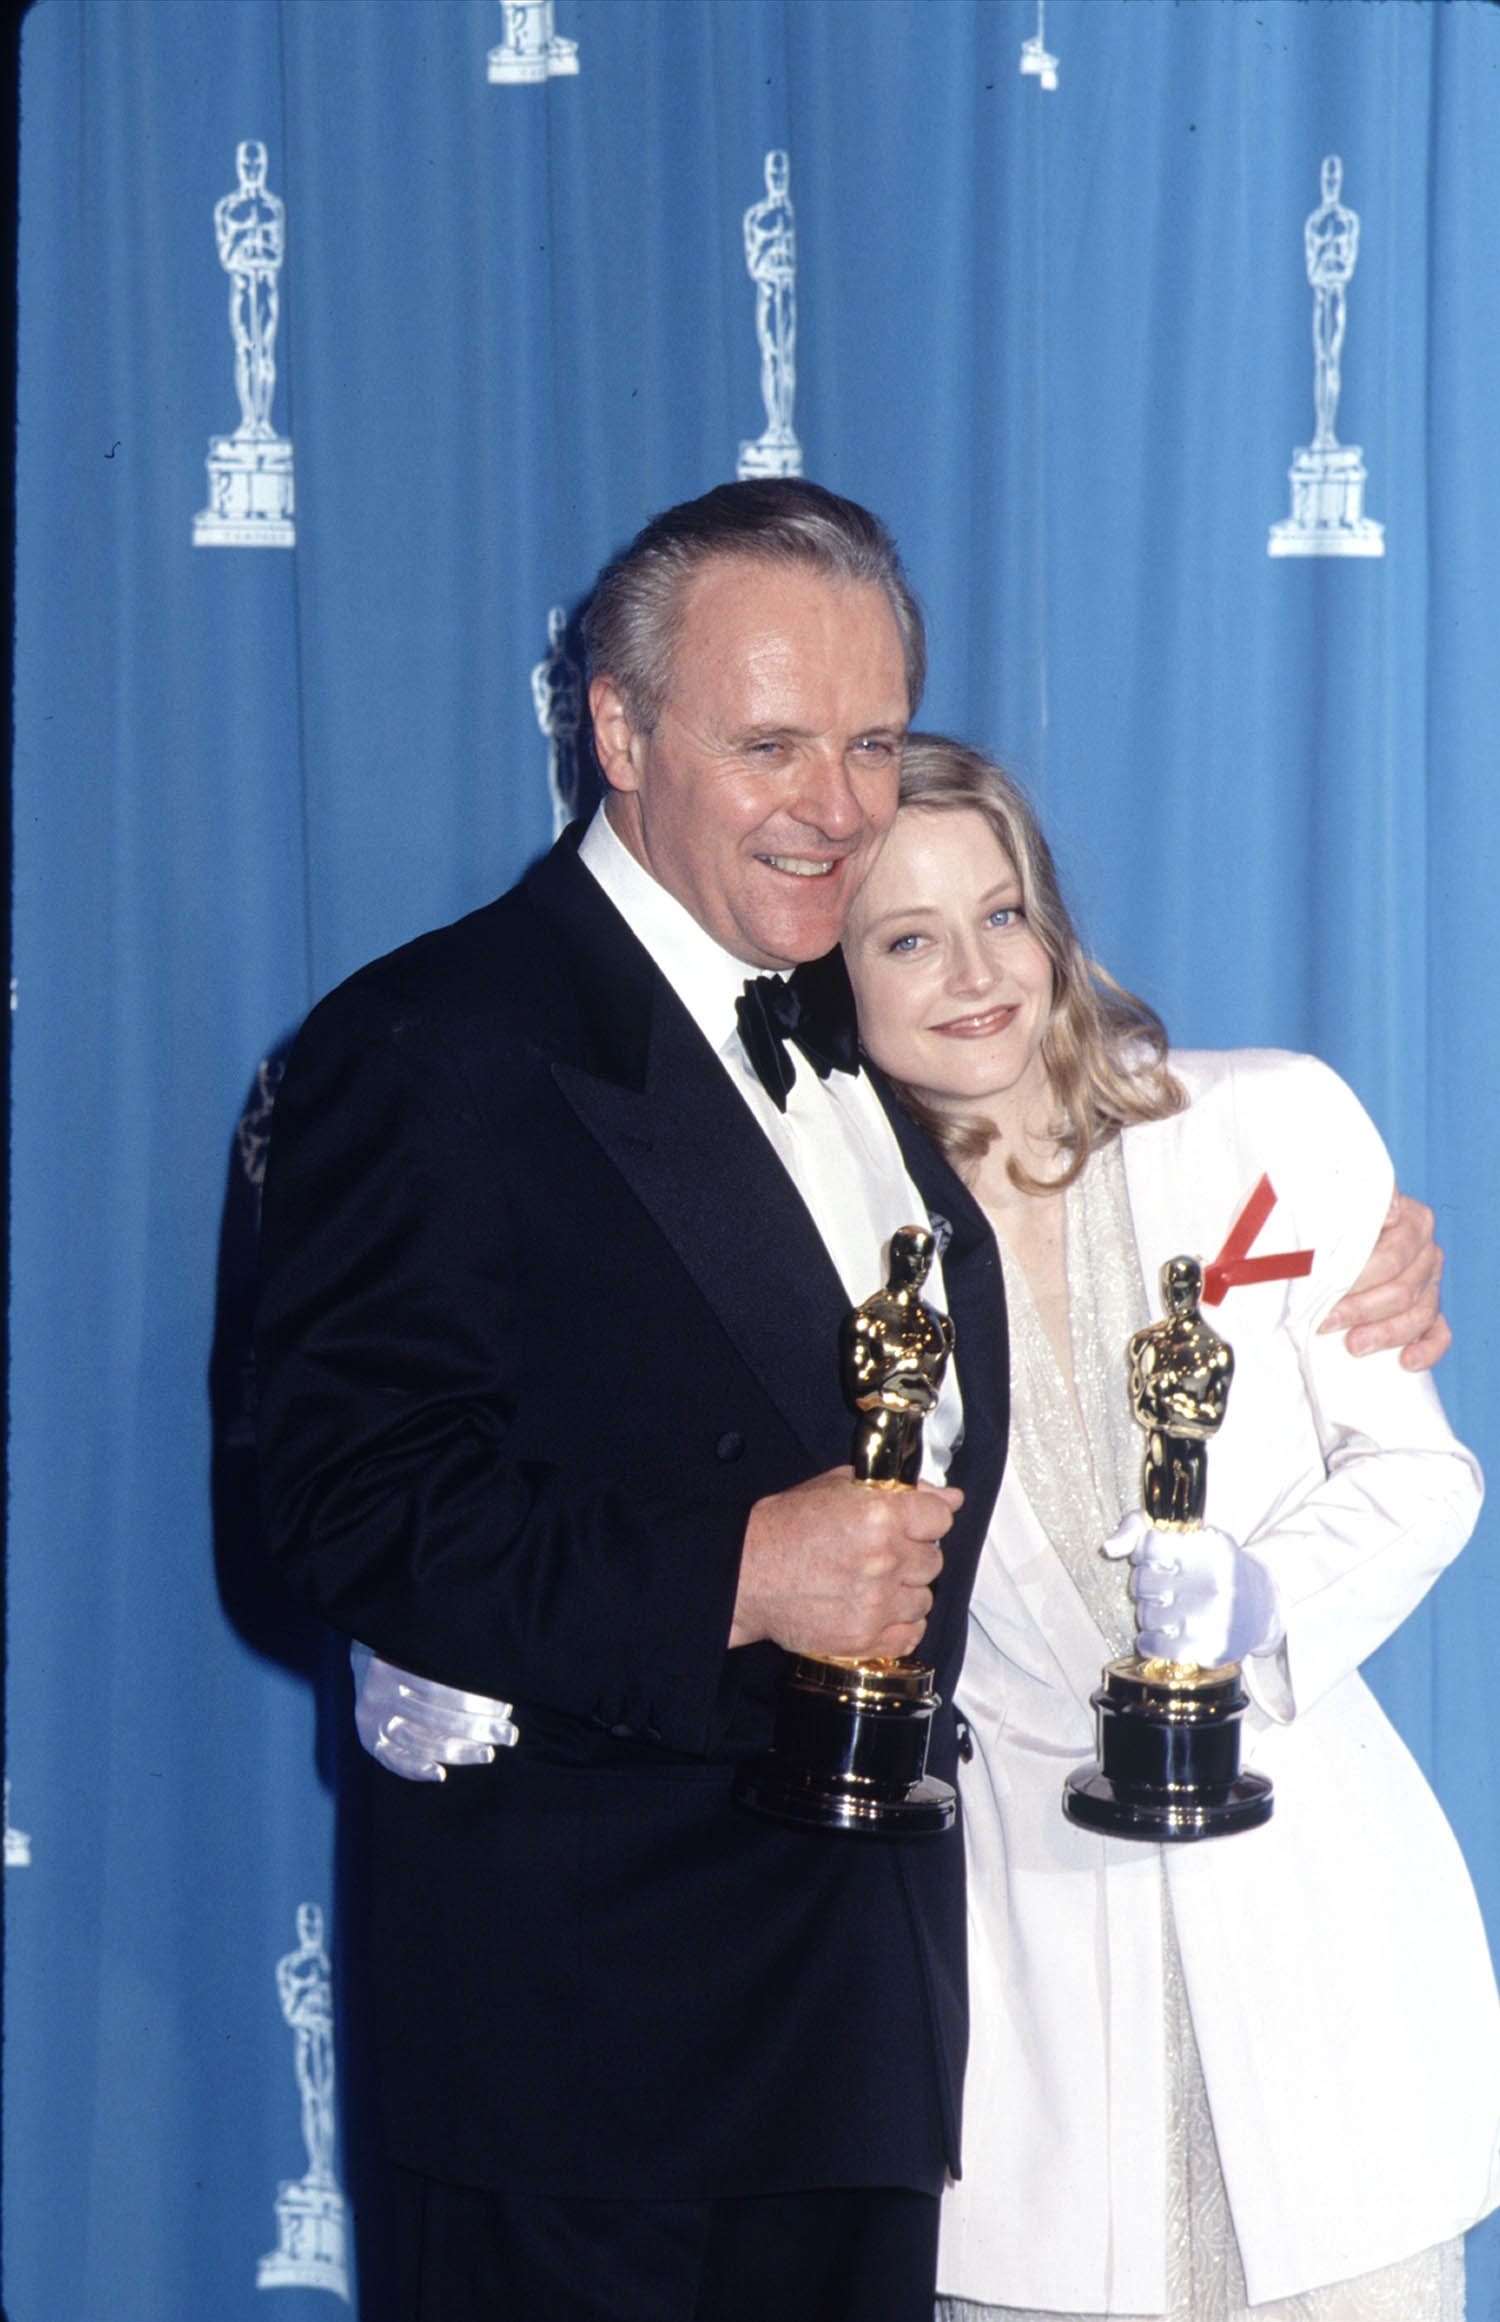 PHOTO: In this March 30, 1992, file photo, Jodie Foster and Anthony Hopkins pose after they both won Oscars for "Silence of the Lambs", at the Academy Awards in Los Angeles.